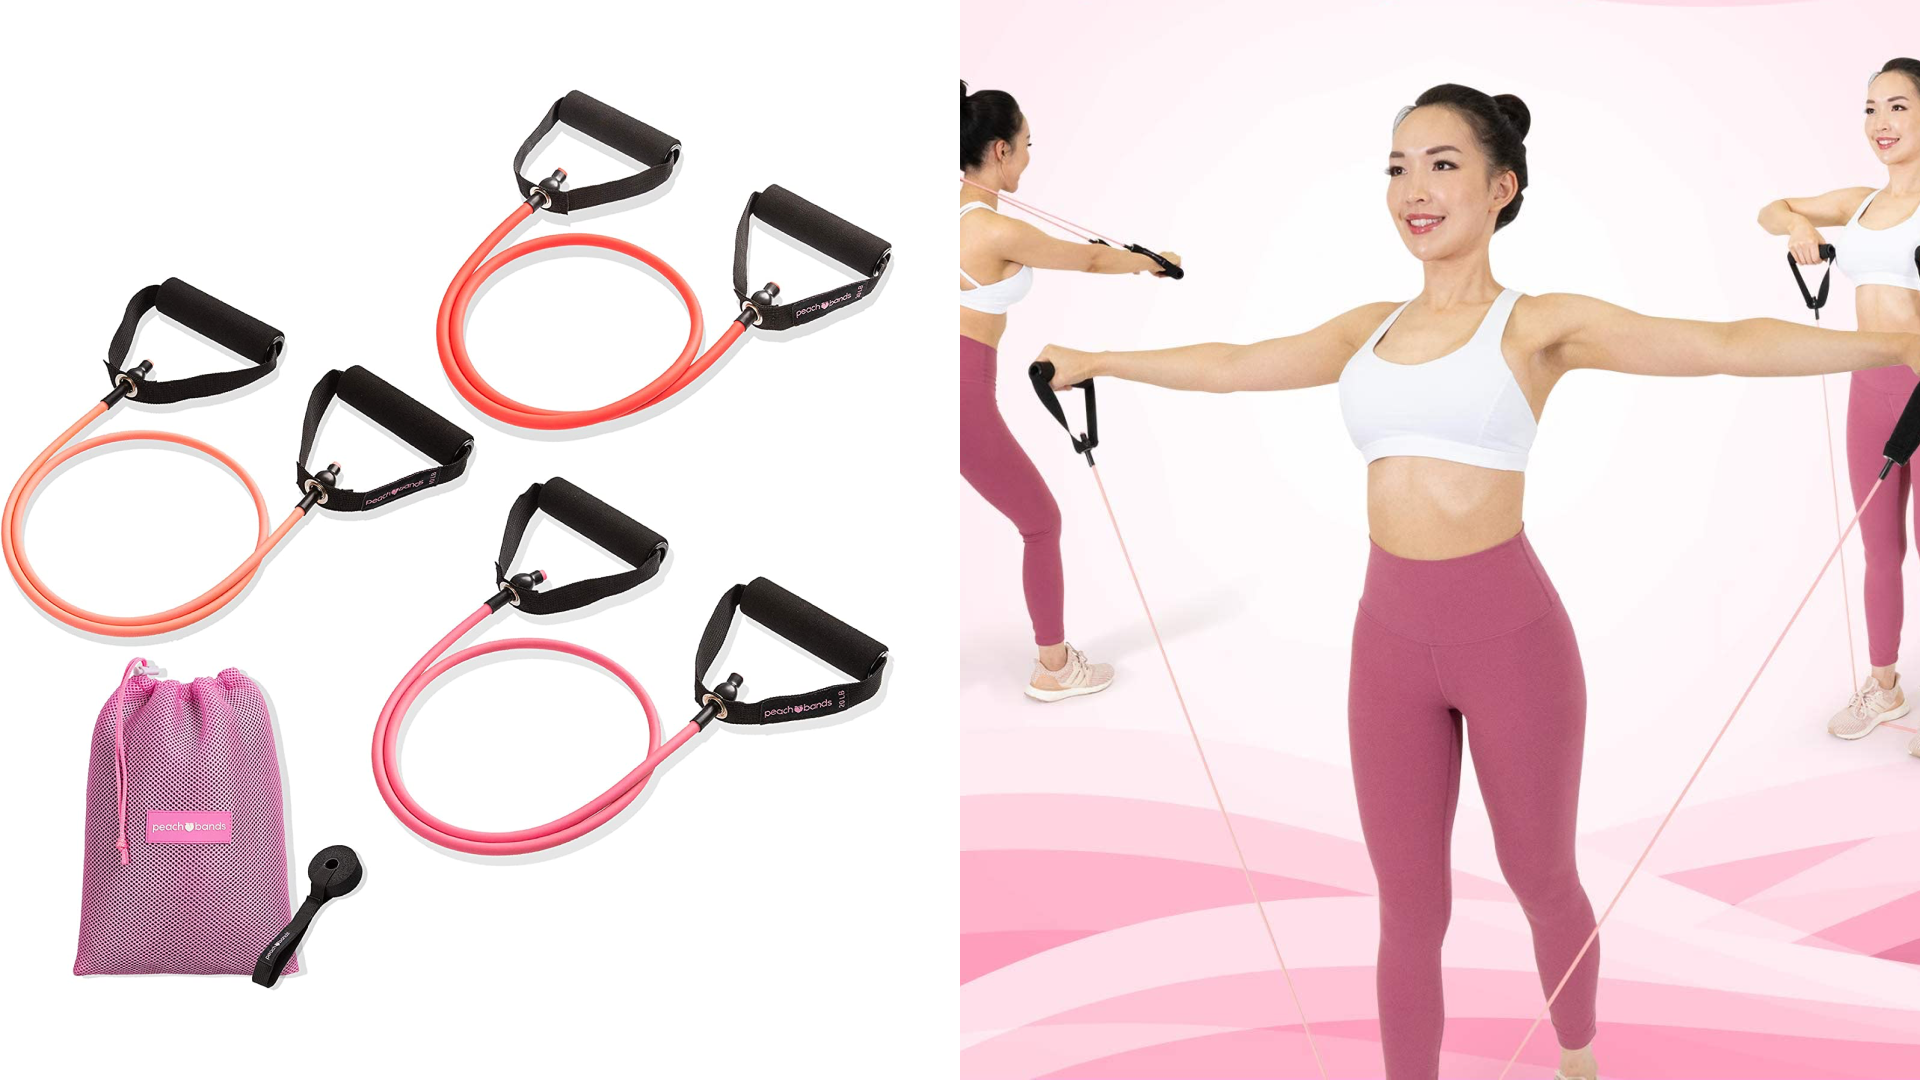 Resistance bands with handles 